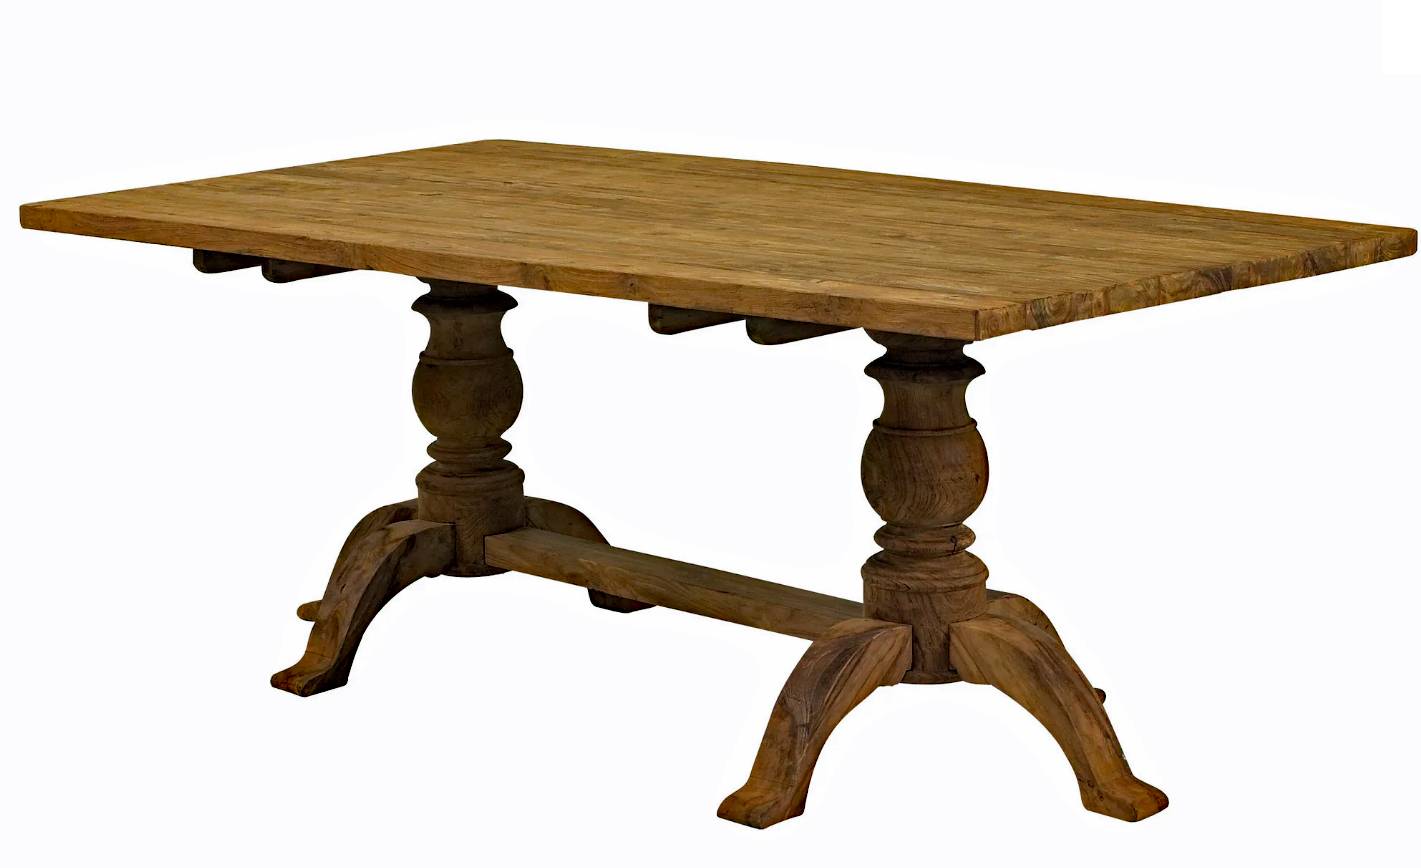 PROVENCE WOOD DINING TABLE